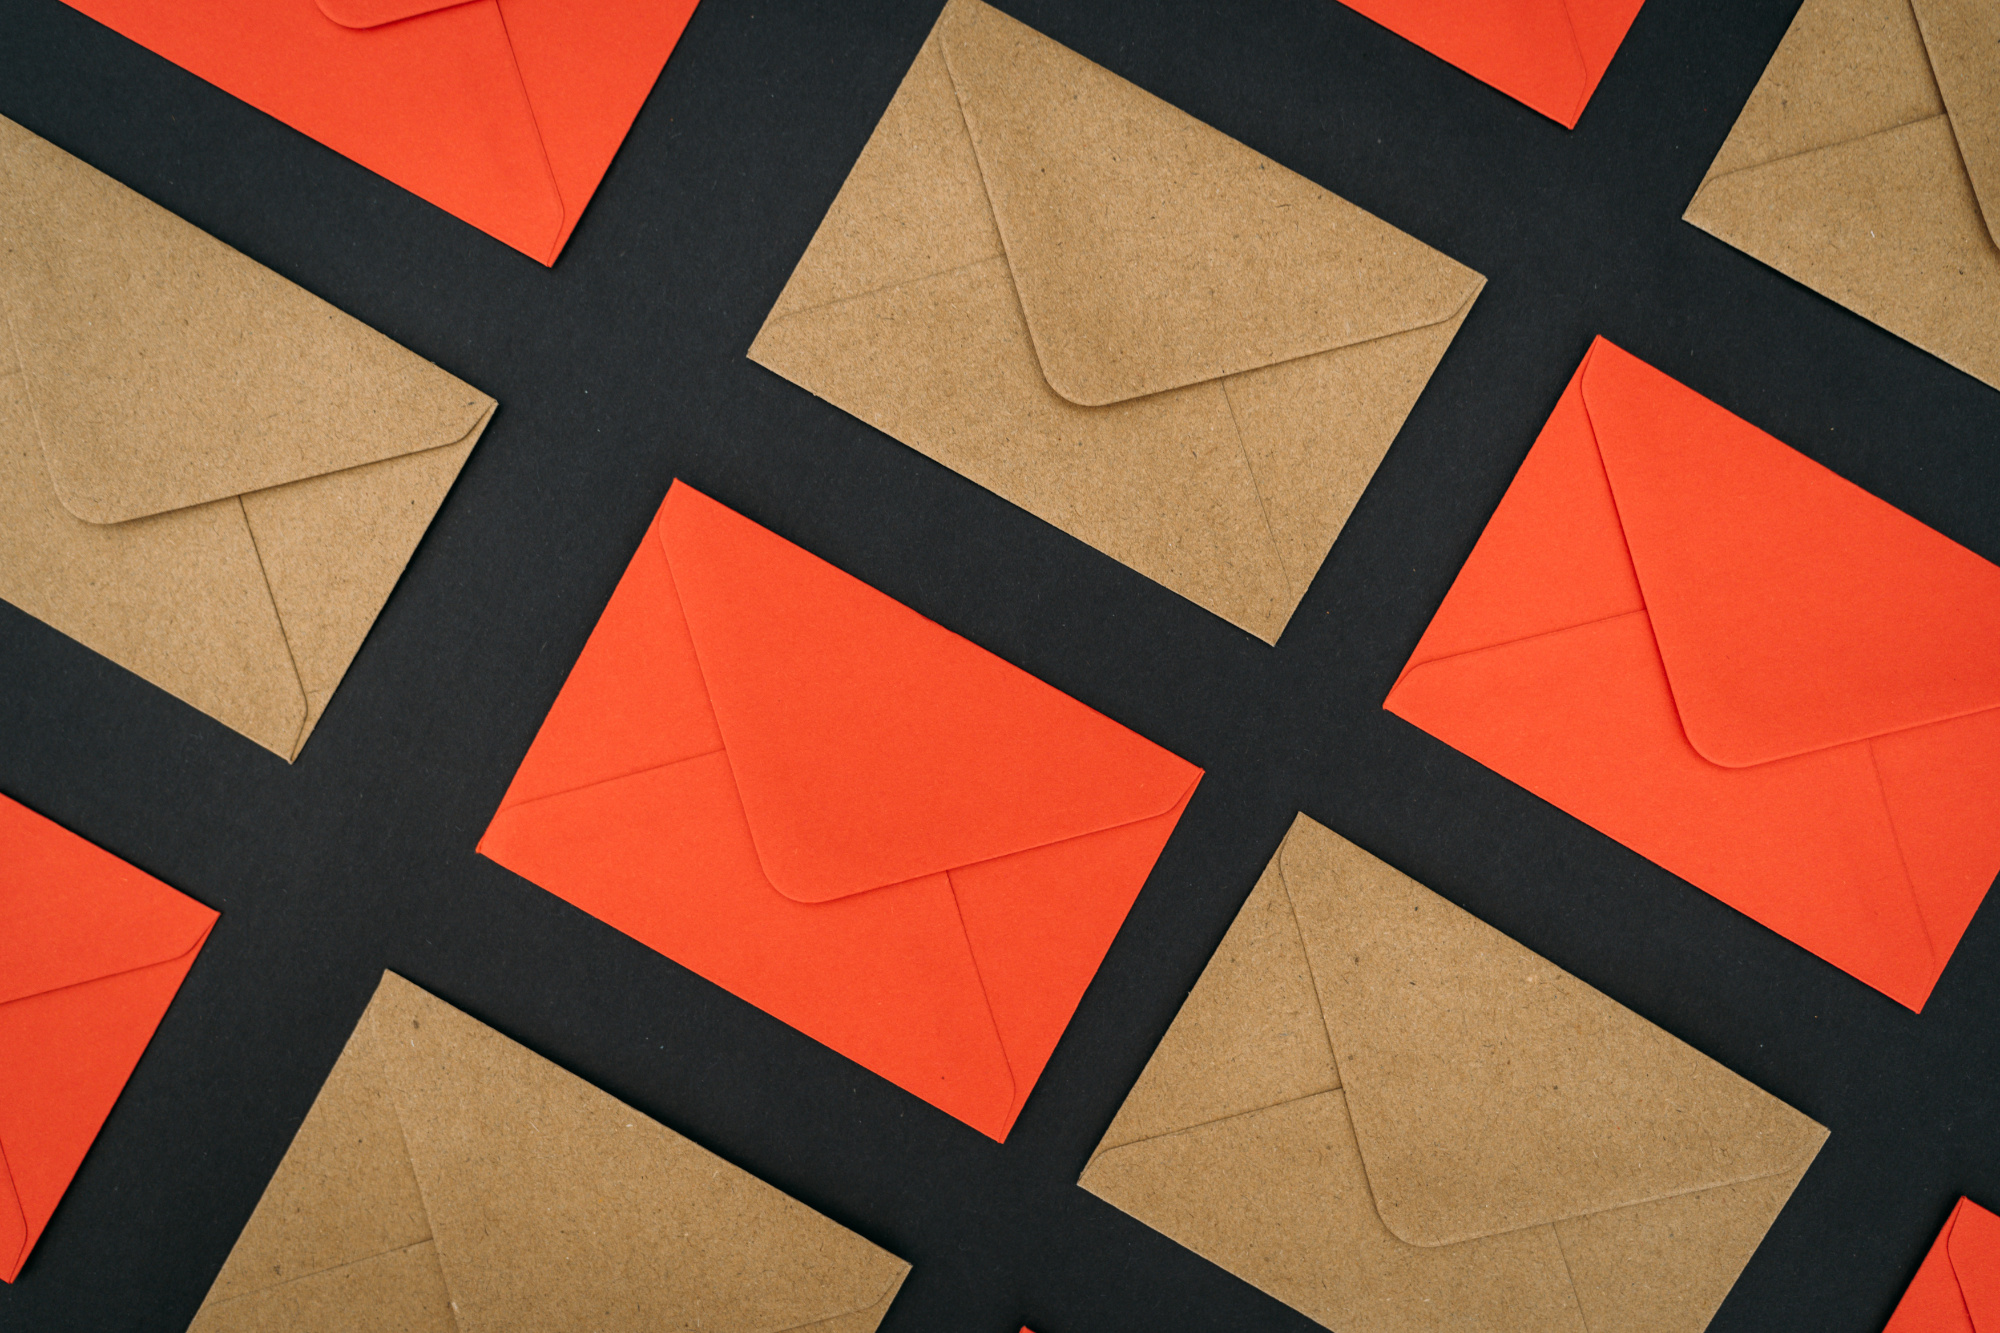 Many brown and red envelopes arranged in a grid pattern